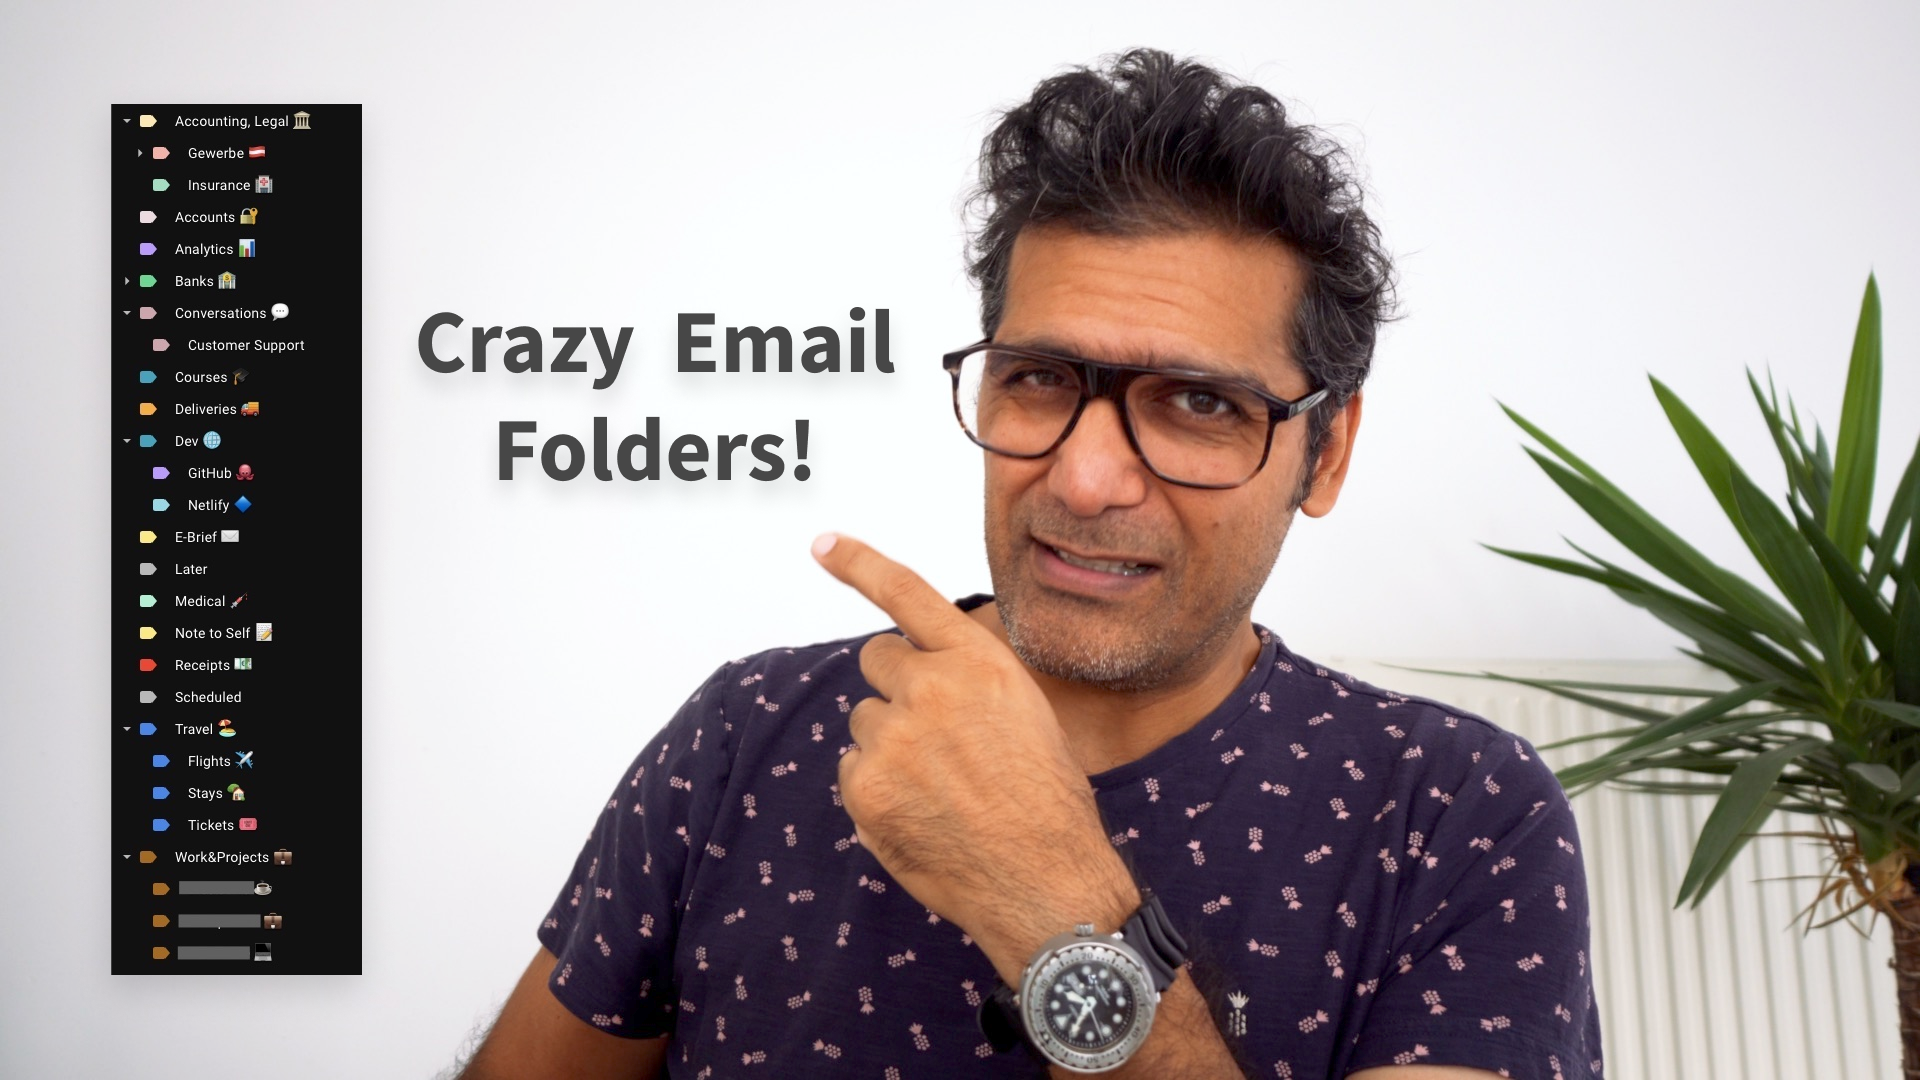 Crazy email folders!